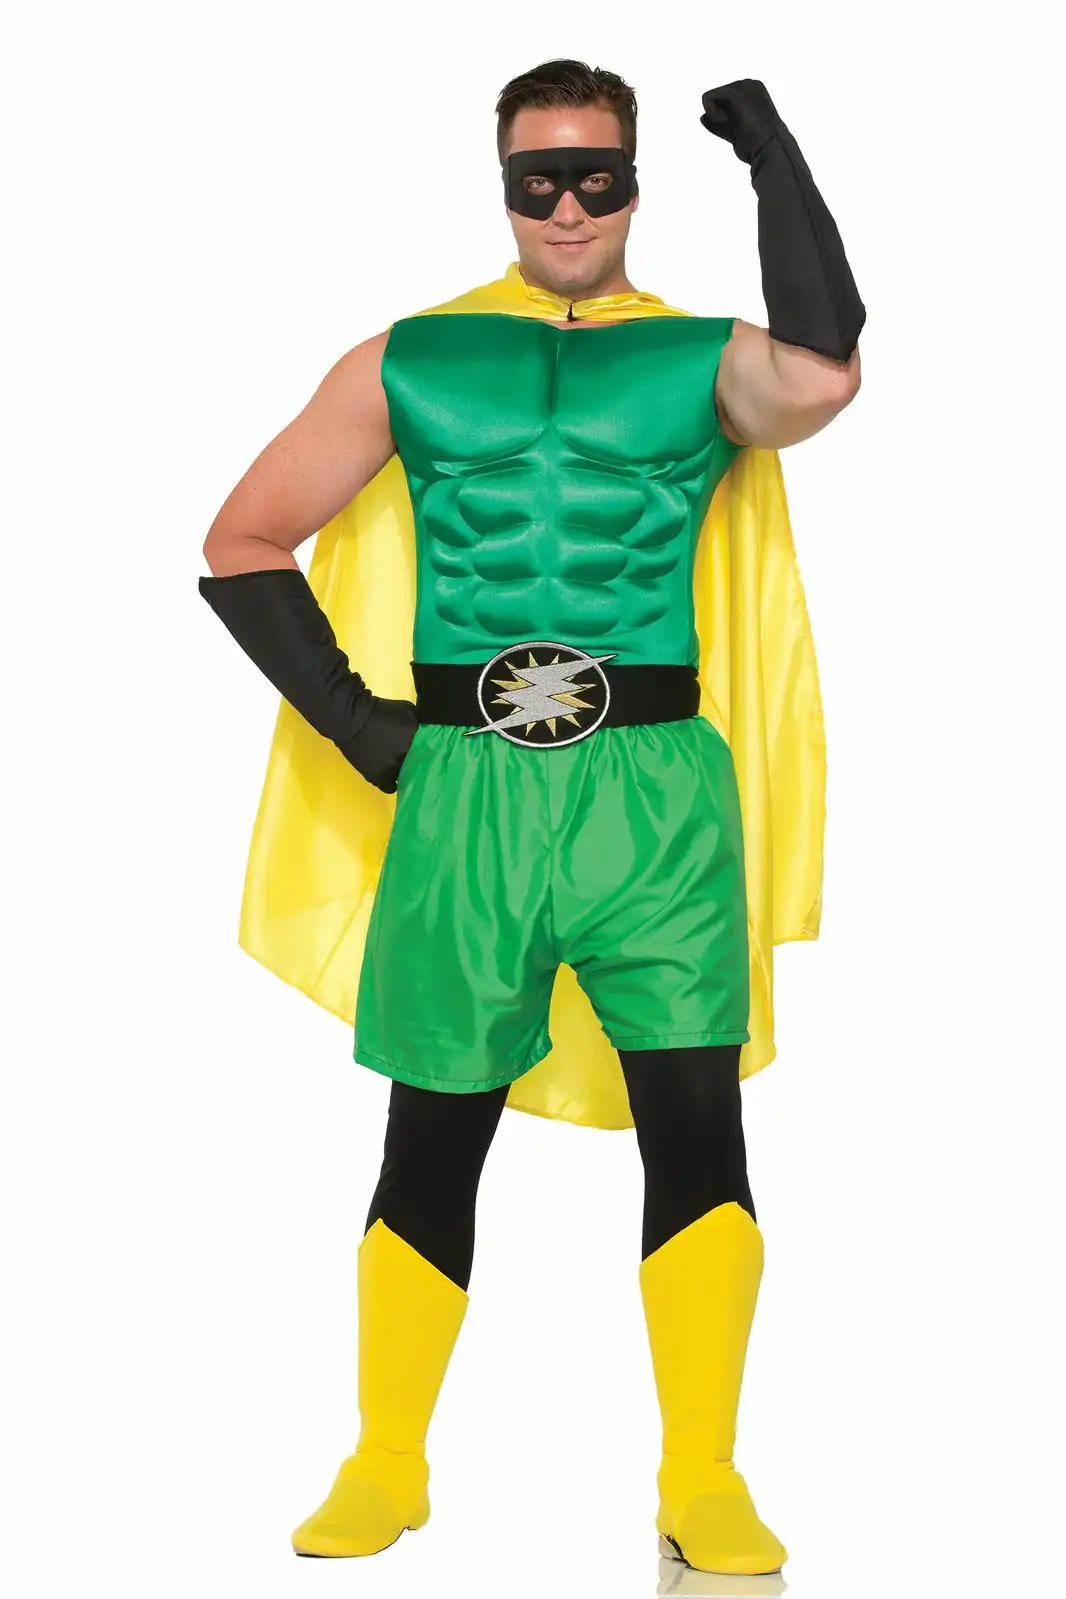 Hero Muscle Chest Sleeveless Men's Superhero Adult Costume Party One Size Green